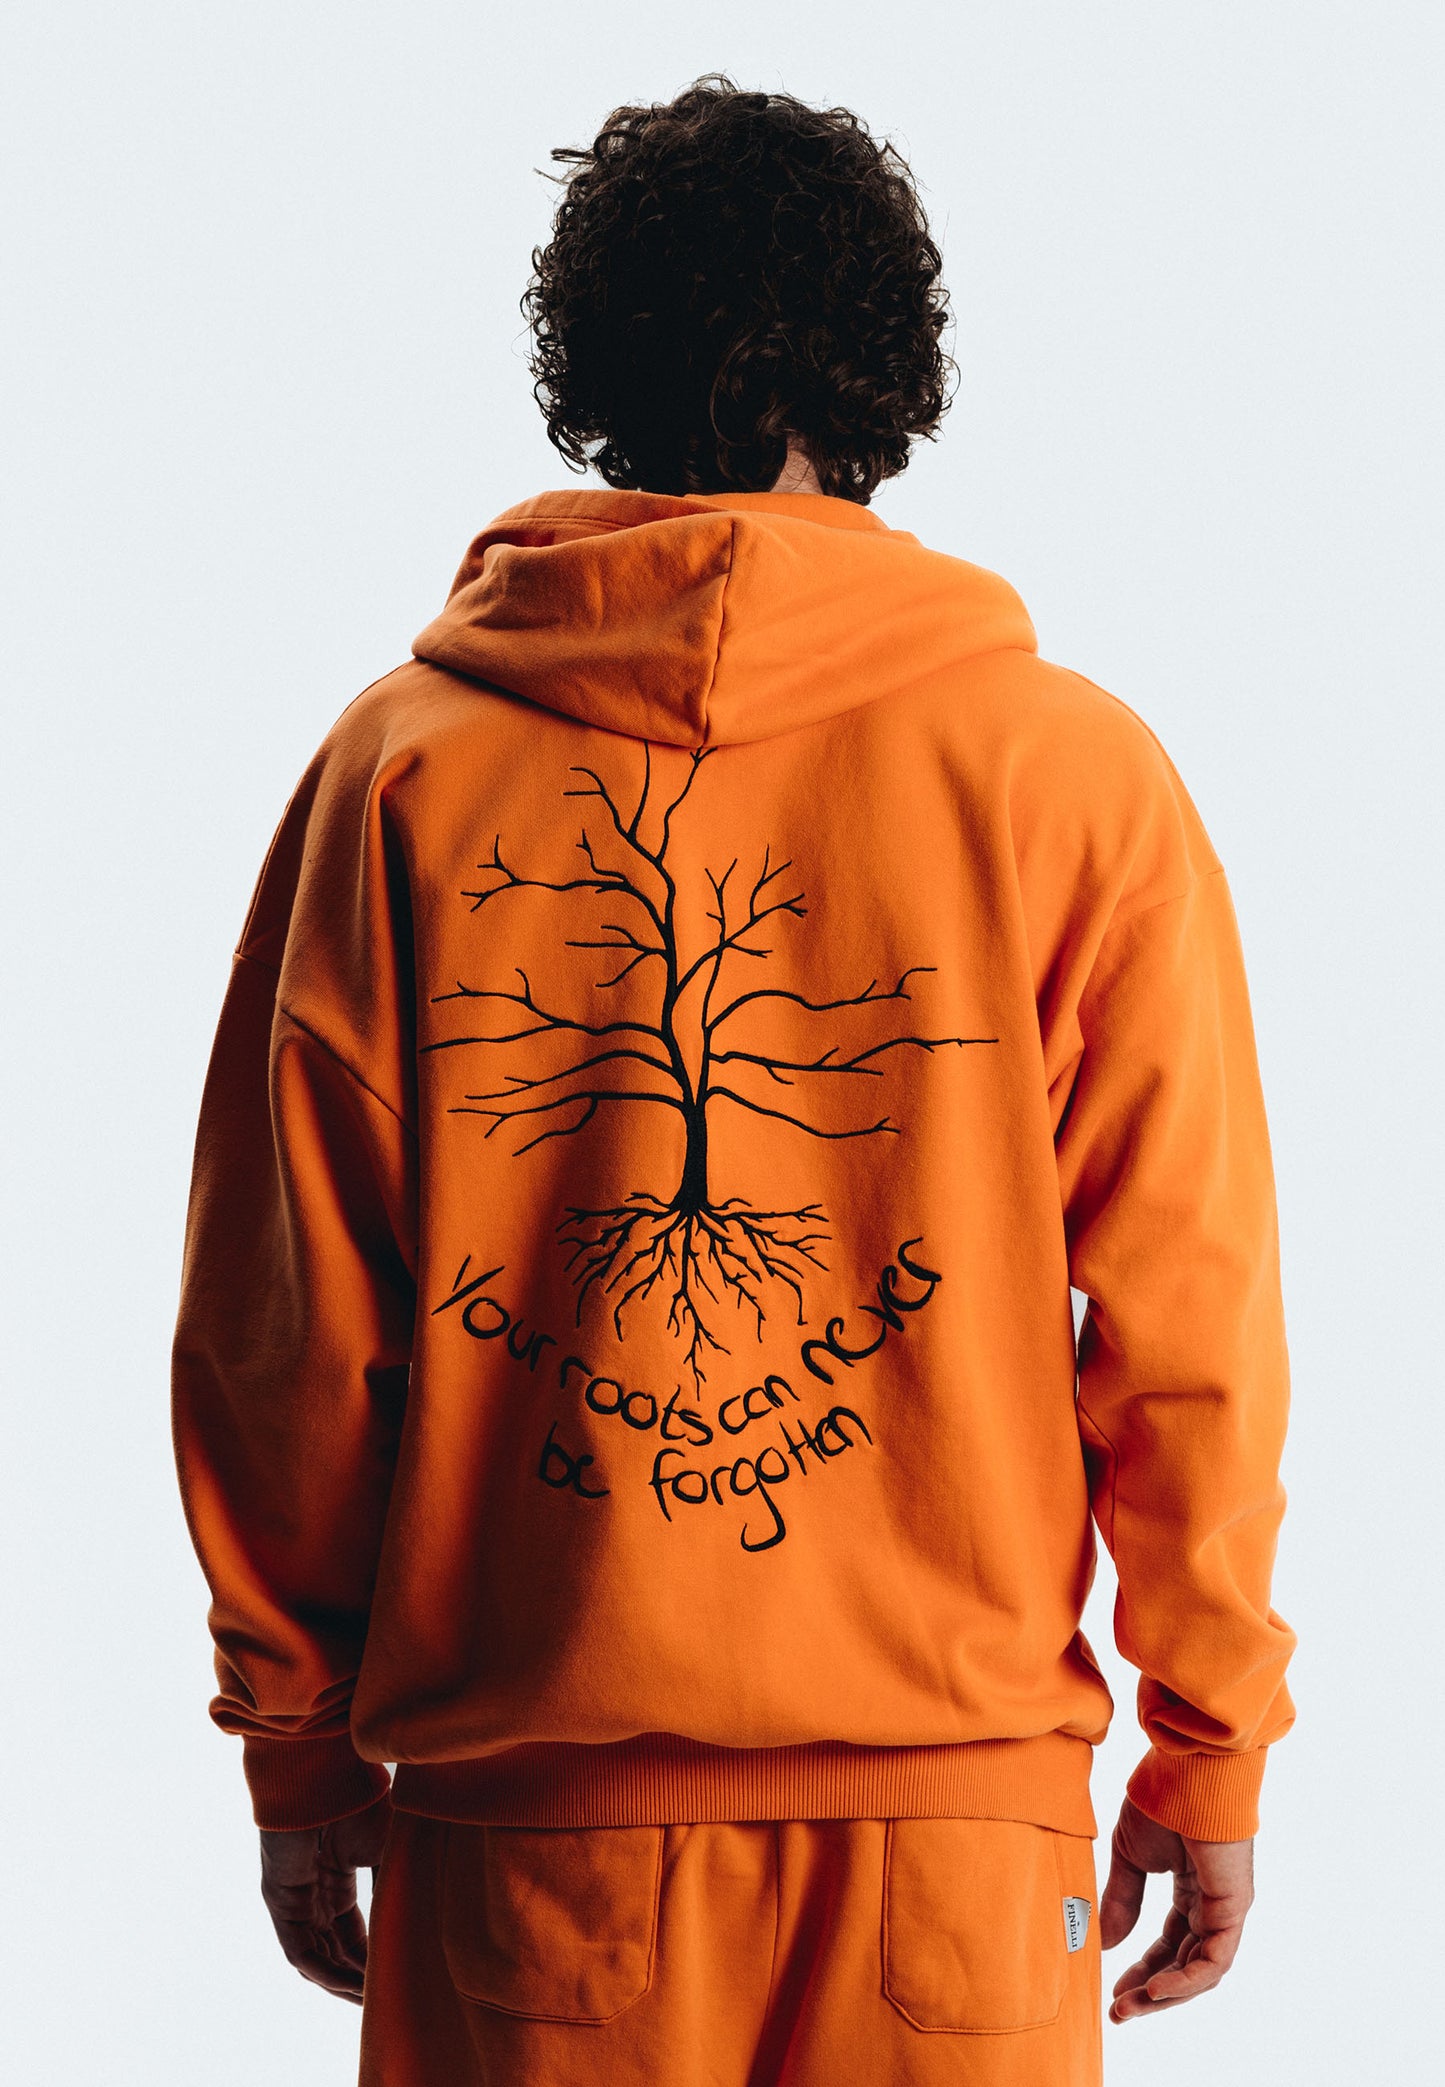 Your Roots can never be forgotten Zipper Hoodie - Finelli